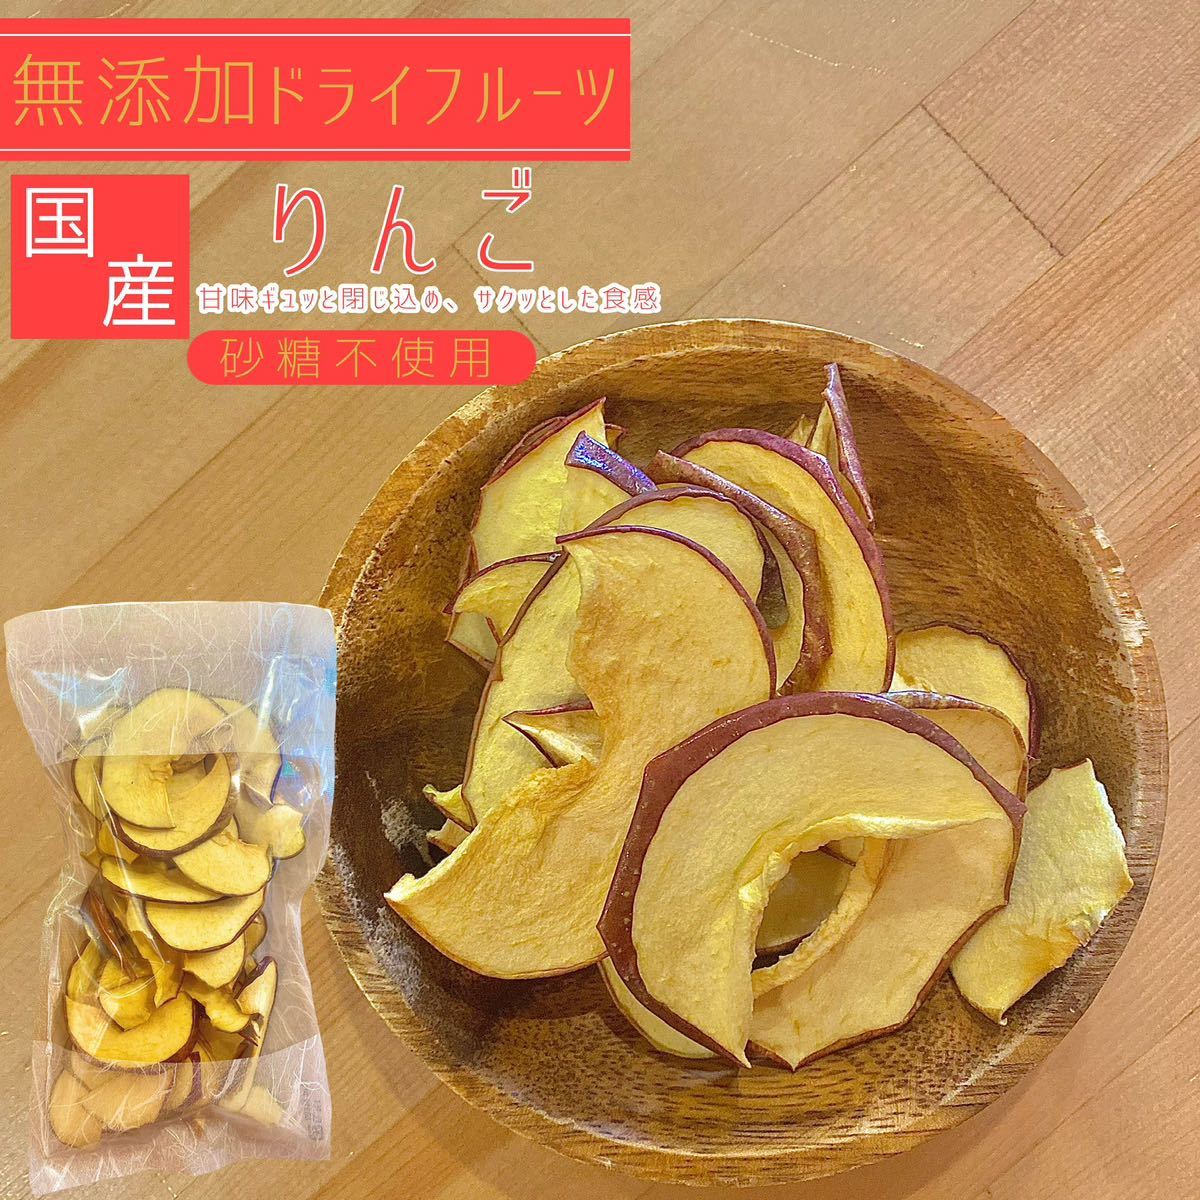 [3 sack ] Aomori prefecture production apple chip s sun ..120g no addition dried fruit dry apple apple chip s sugar un- use sweets confection 